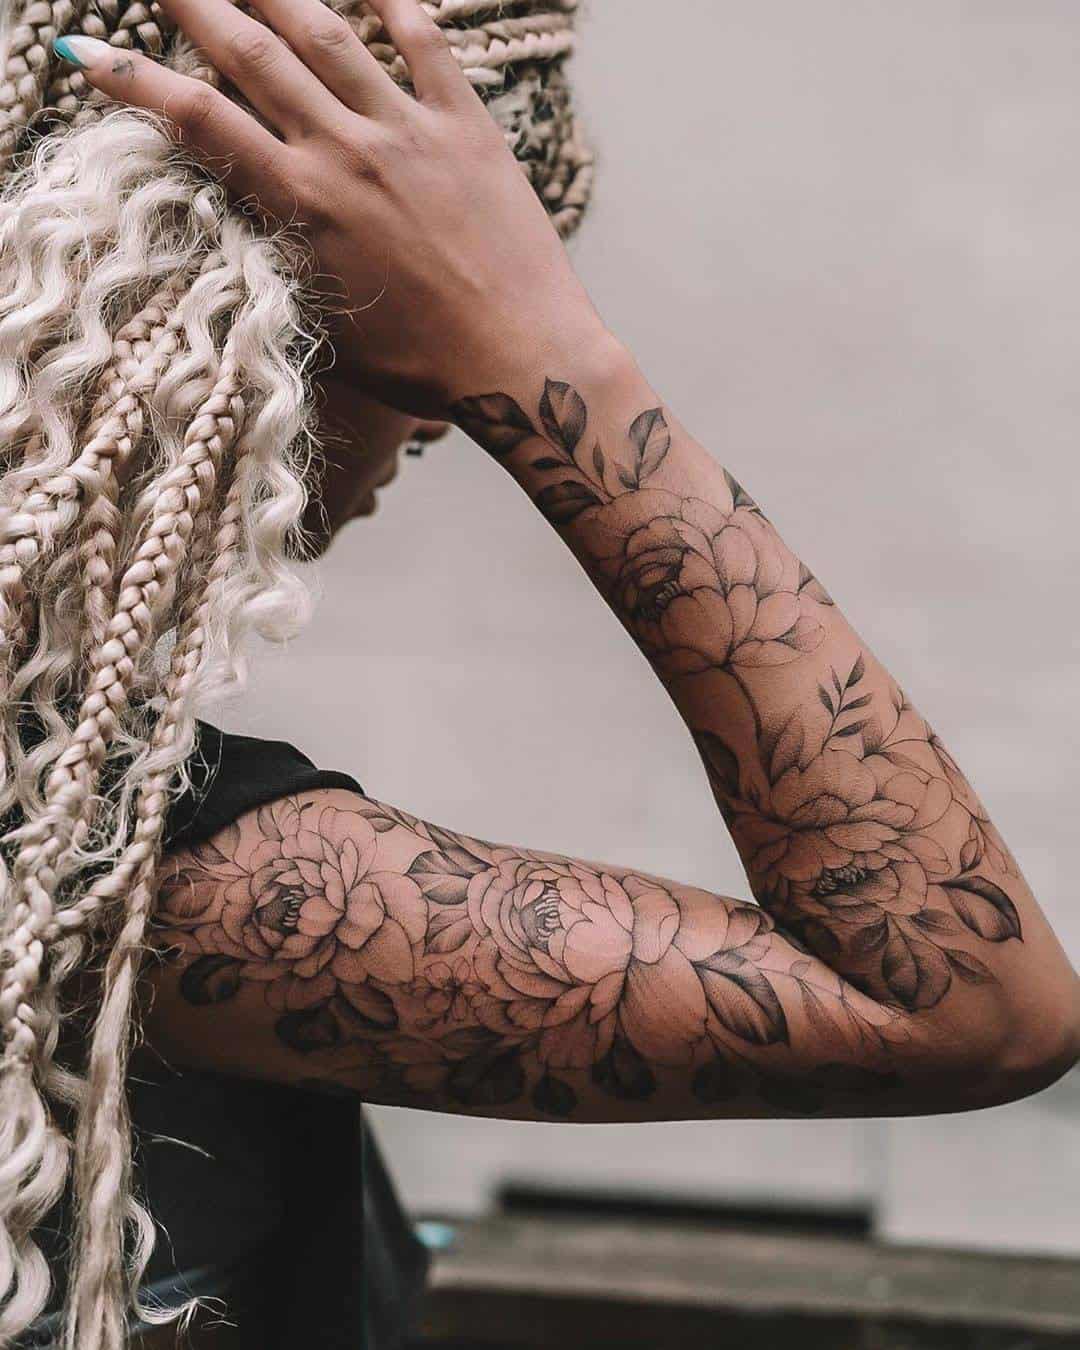 50 Edgy Tattoo Sleeve Ideas That Are Also Super Gorgeous | CafeMom.com